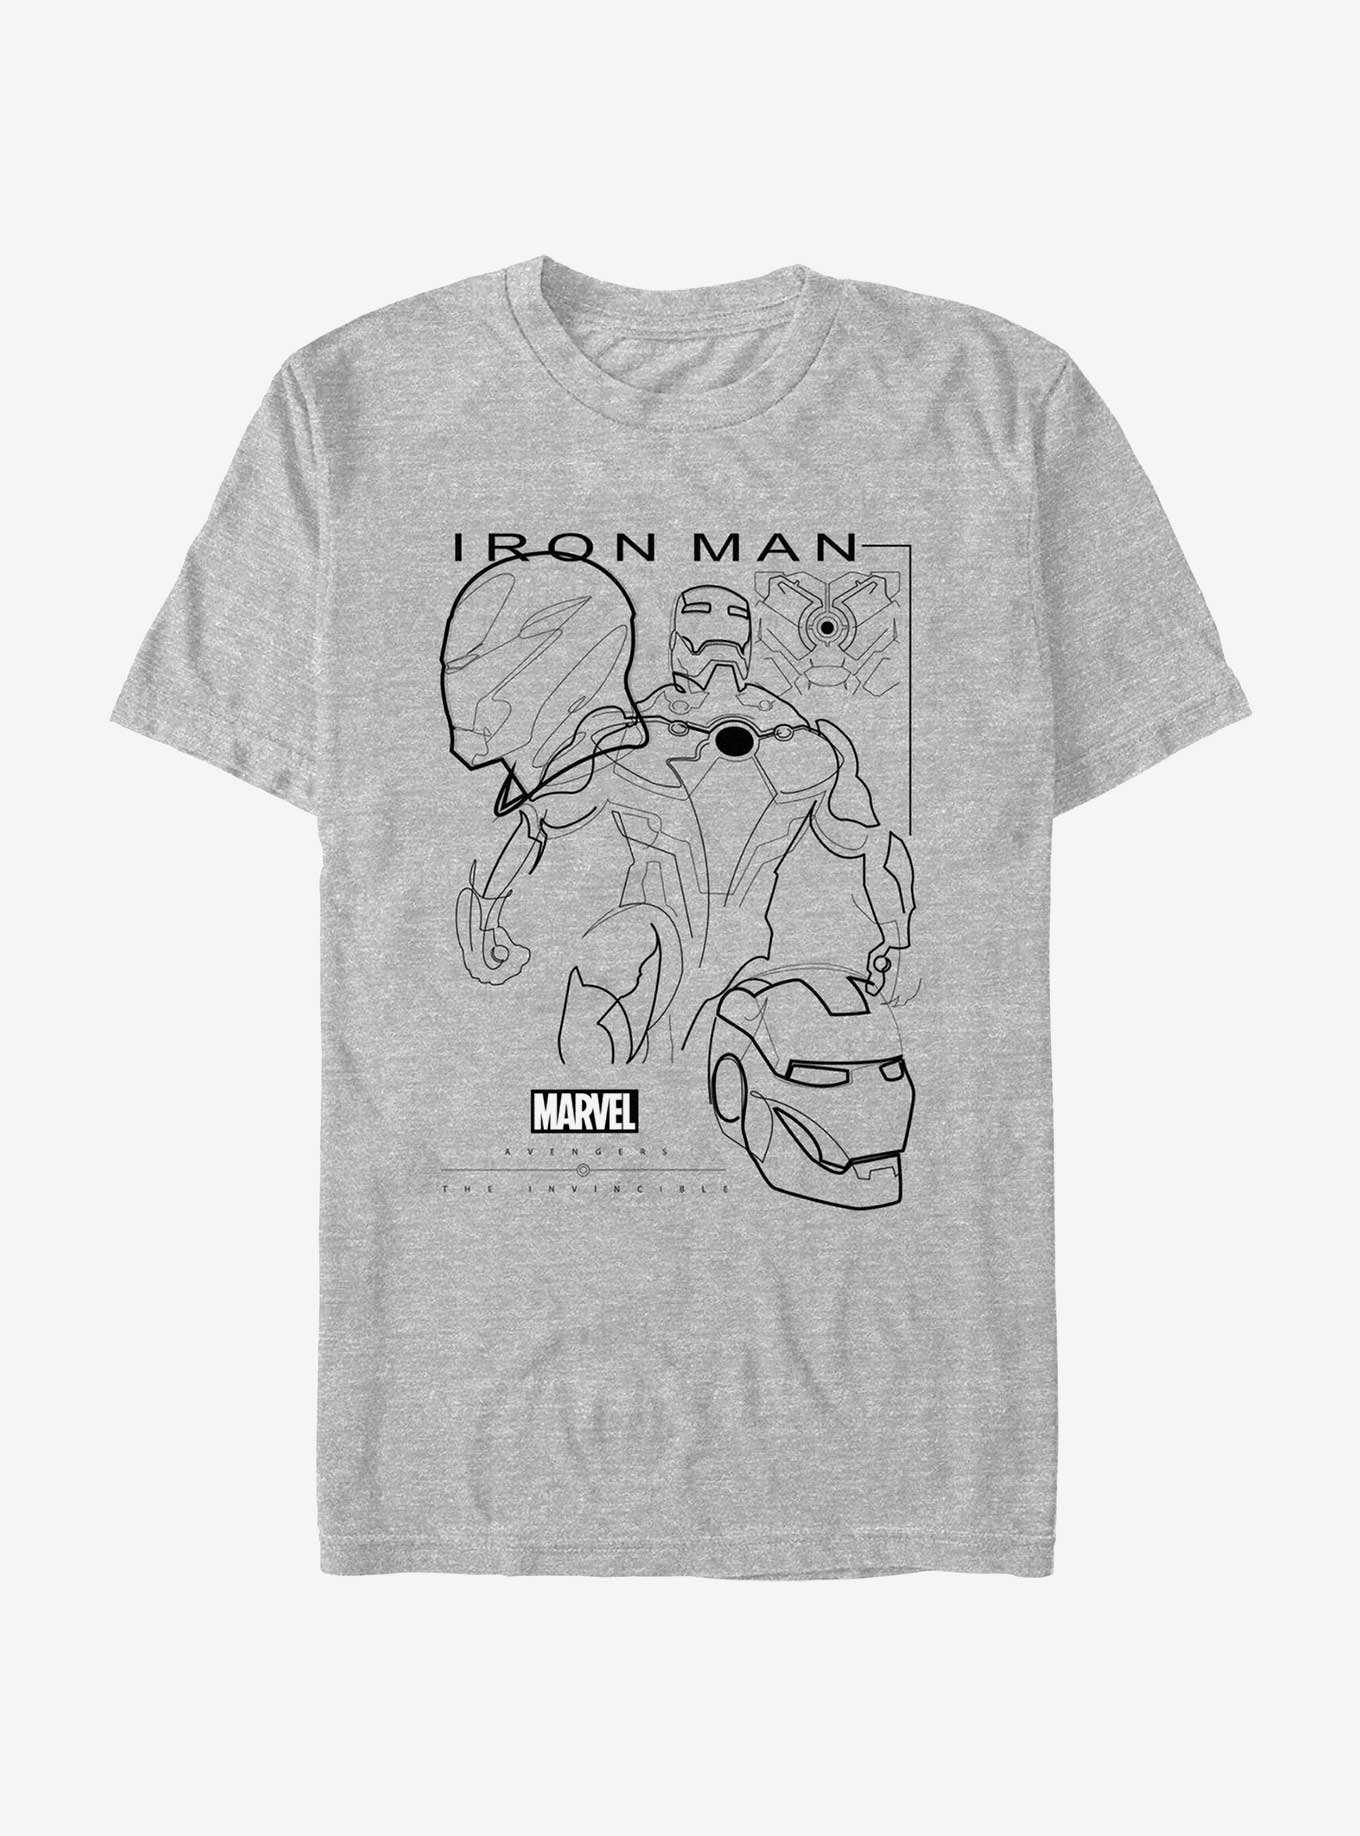 OFFICIAL Iron | Man Merchandise Topic & Hot T-Shirts